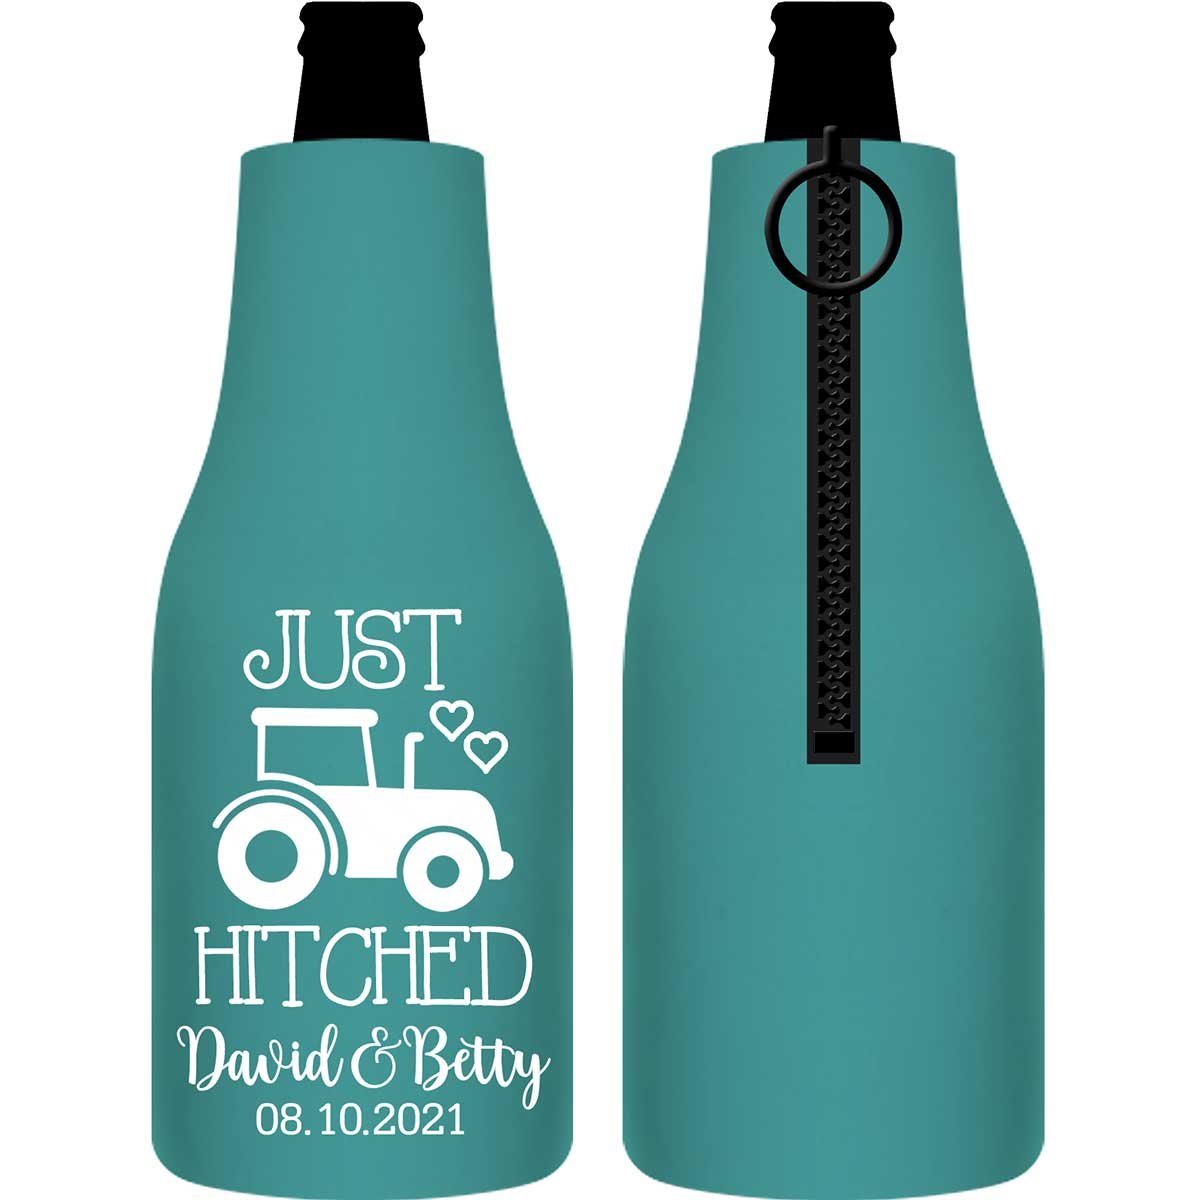 Just Hitched 1B Tractor Design Foldable Zippered Bottle Koozies Wedding Gifts for Guests